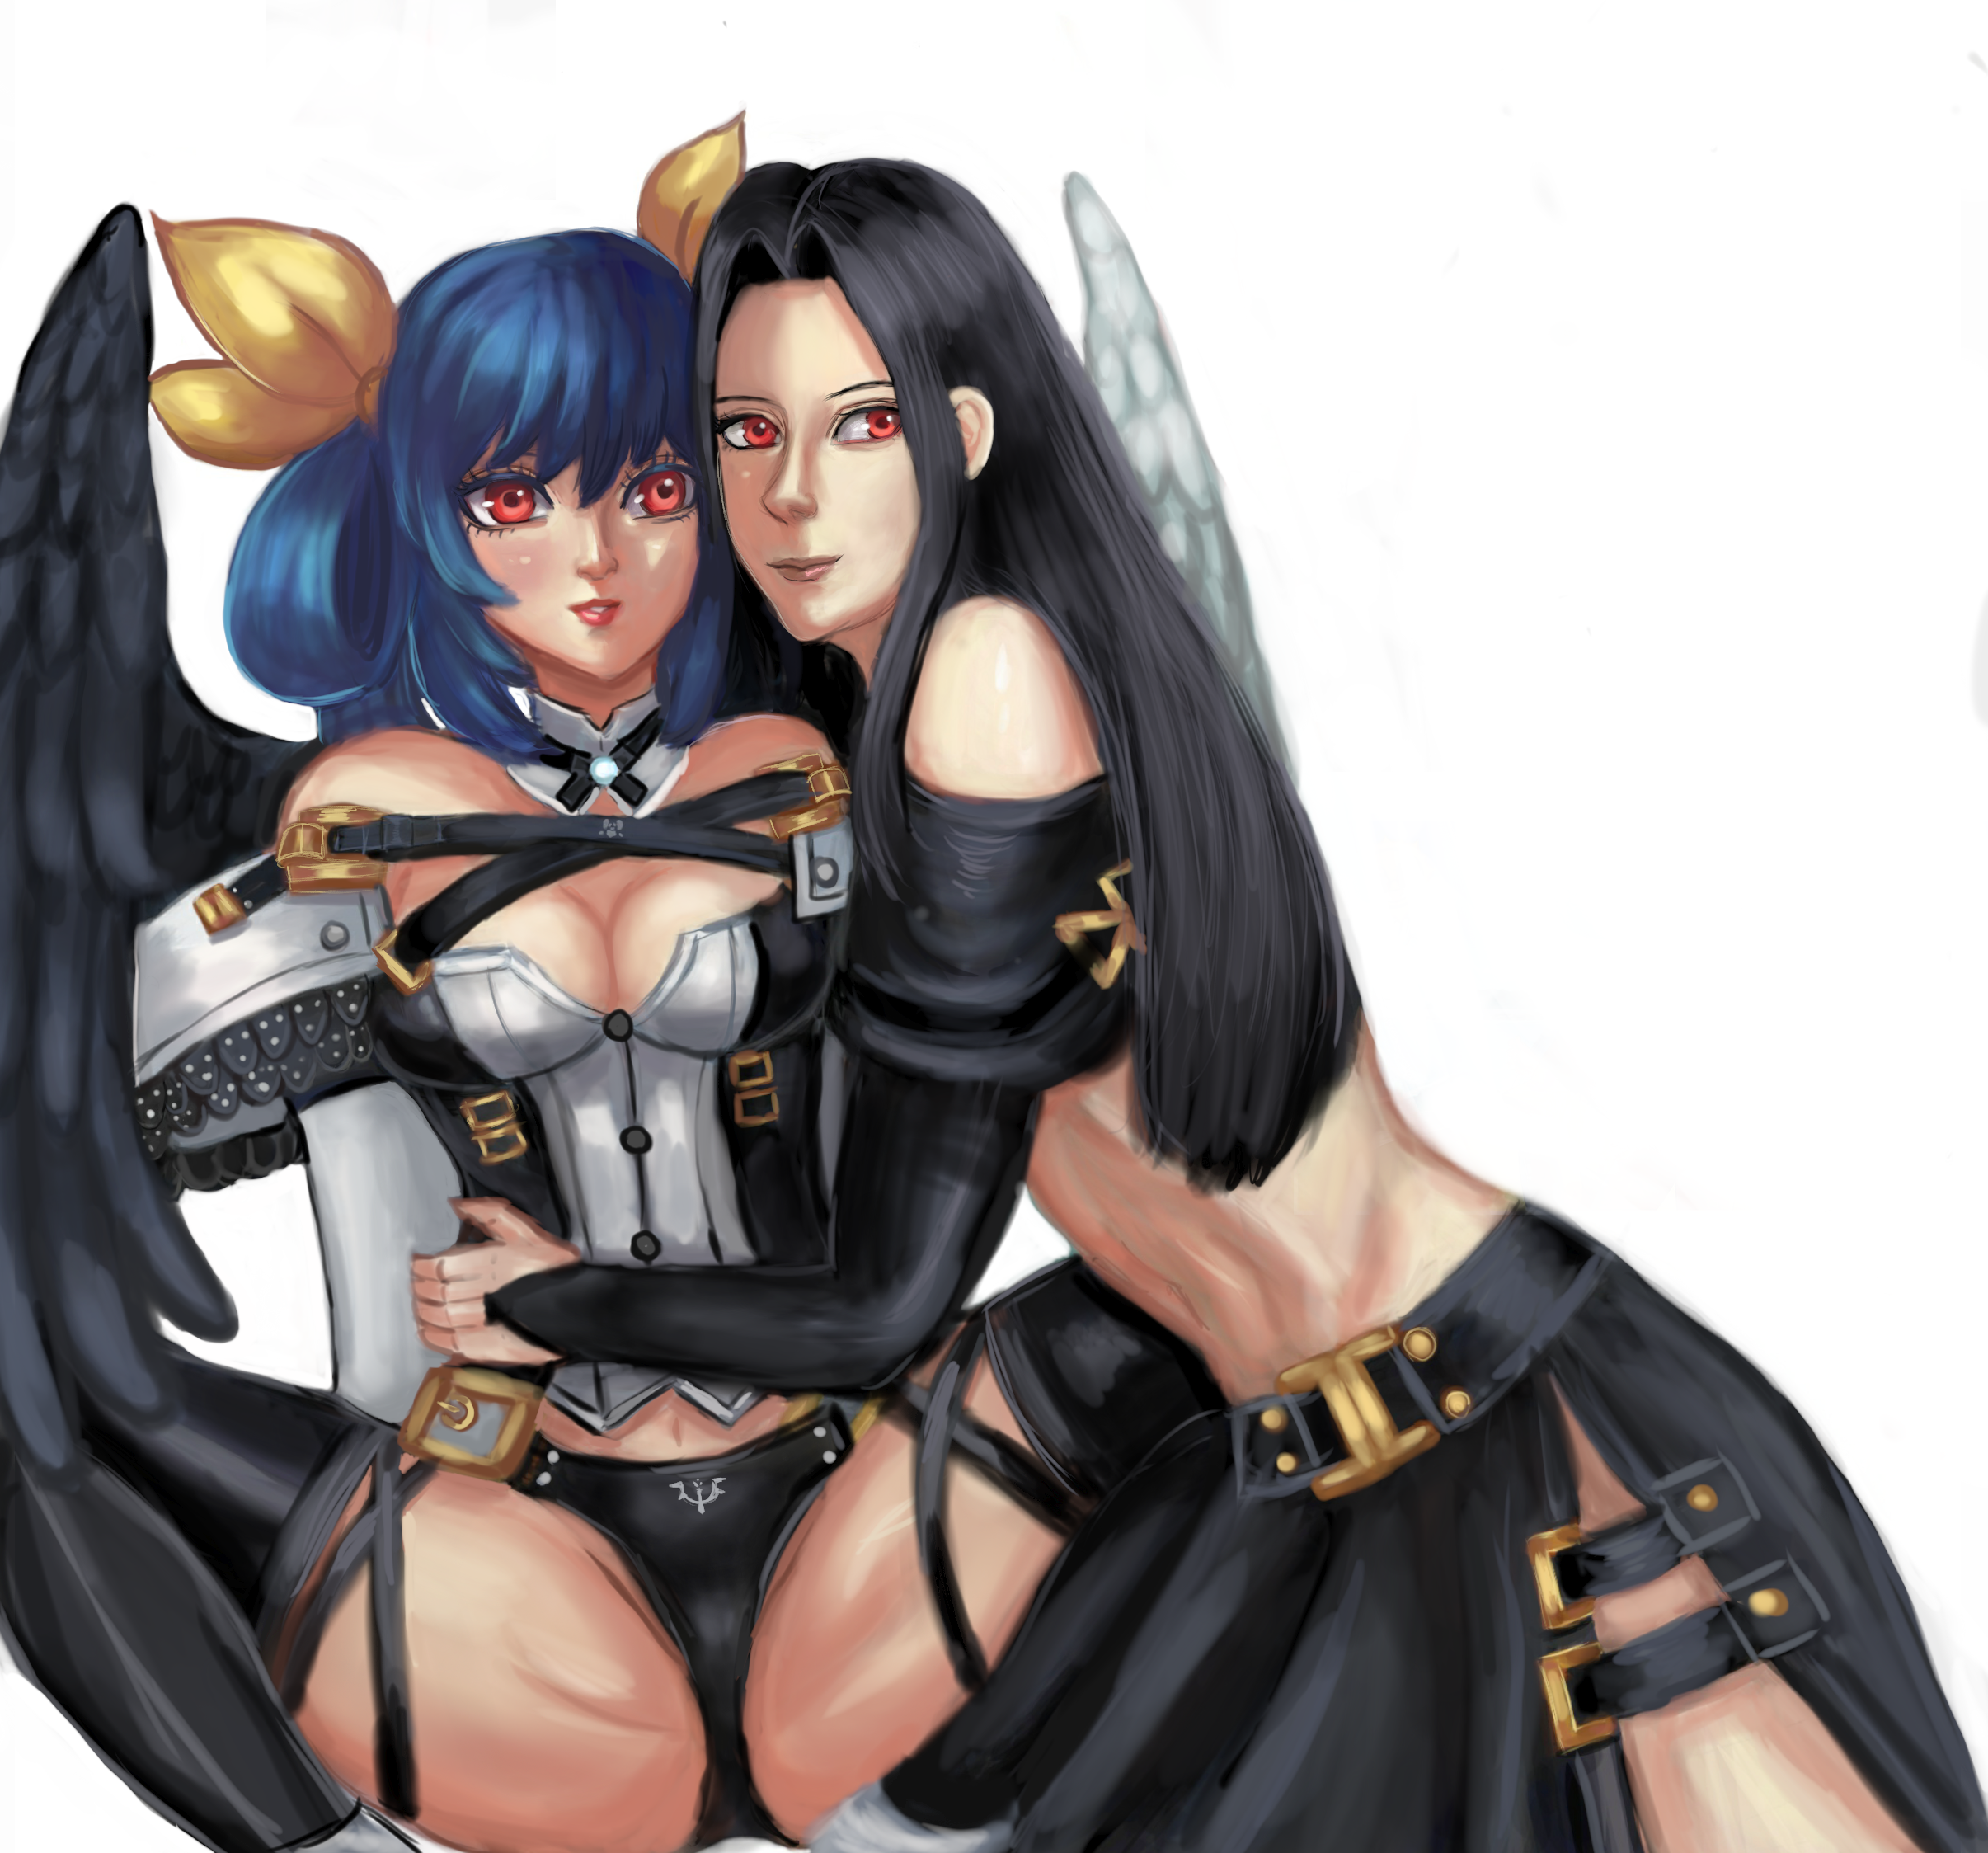 Anime 2411x2247 Guilty Gear Guilty gear strive Guilty Gear Xrd Dizzy (Guilty Gear) Testament (guilty gear) anime girl with wings anime games anime girls gothic fighting games